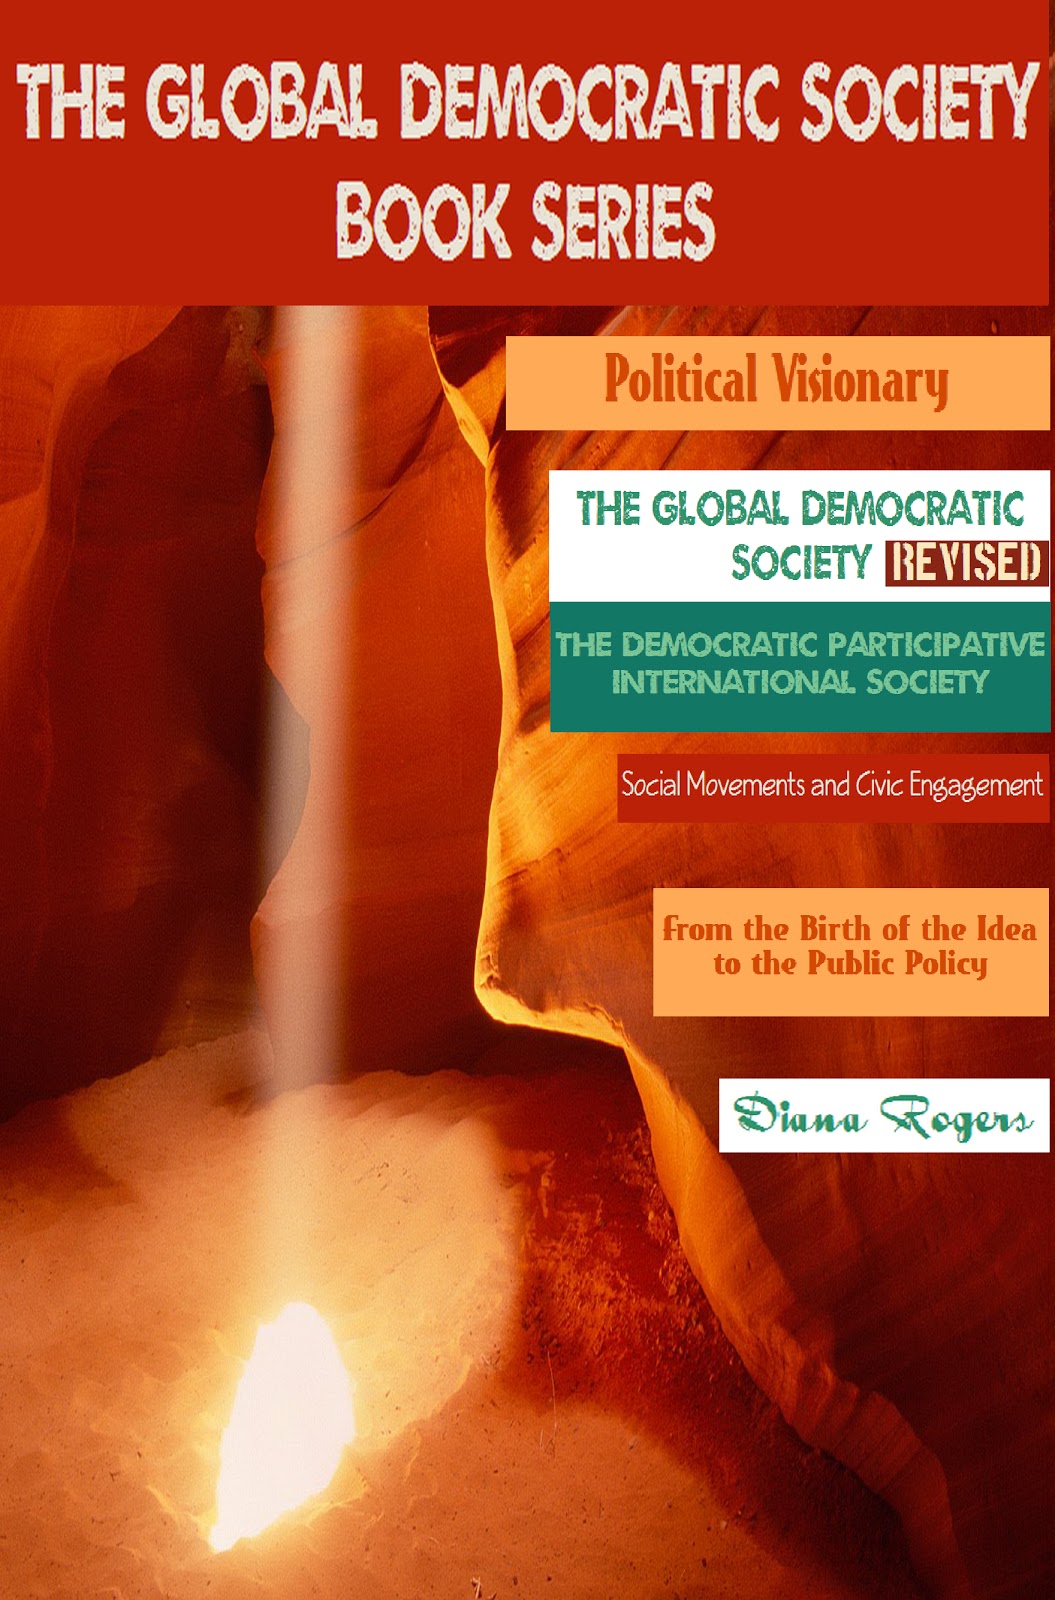 The Global Democratic Society Revised: The Participative Democratic International Society [Kindle Edition] by Diana Rogers